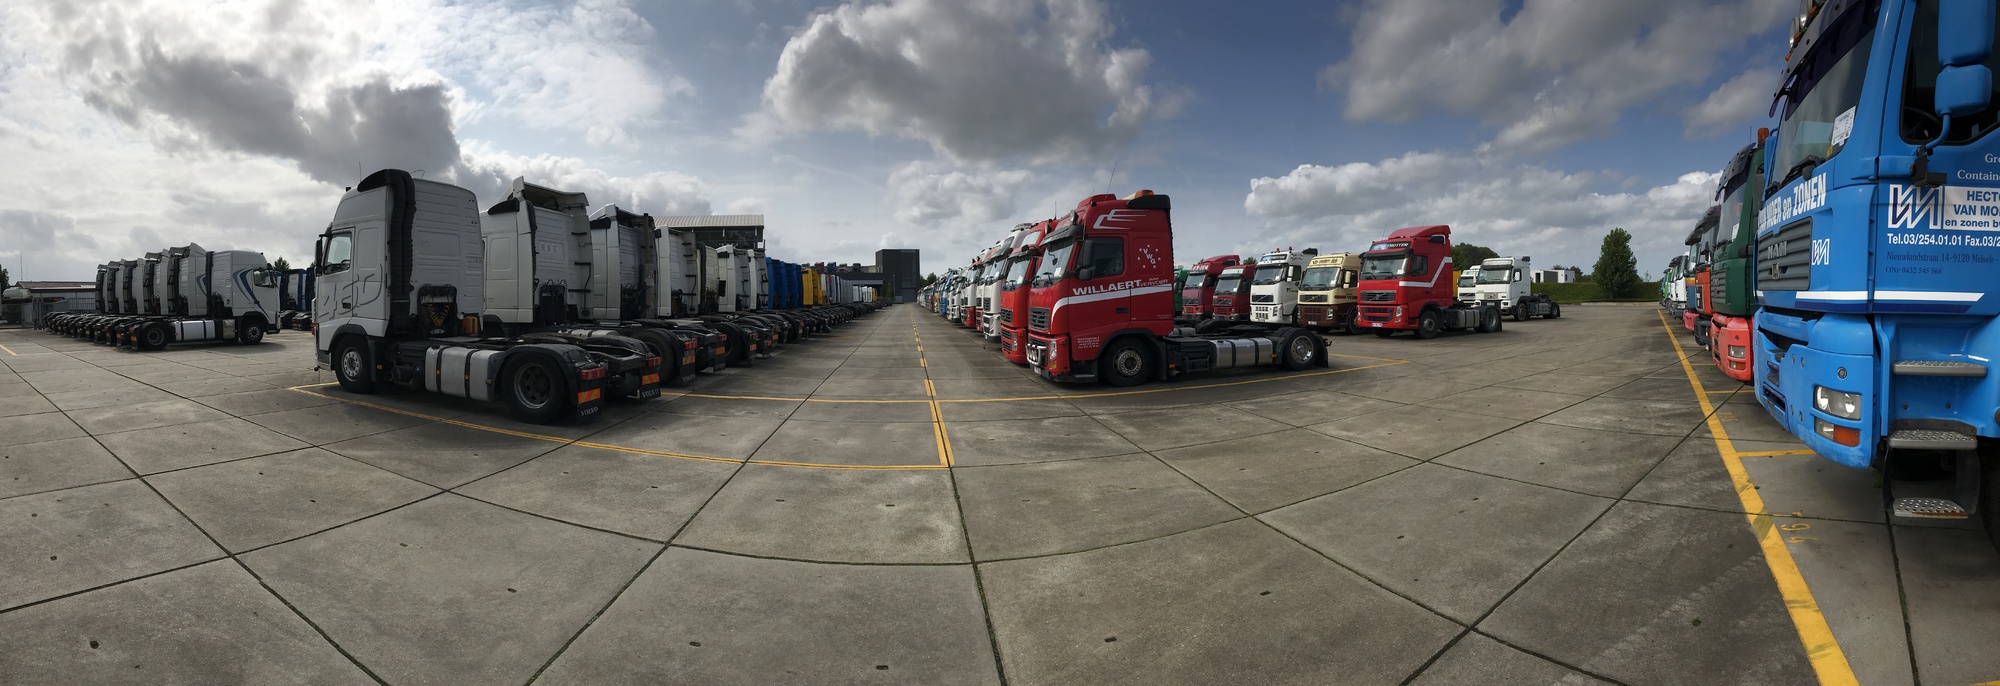 Degroote Trucks & Trailers undefined: photos 7